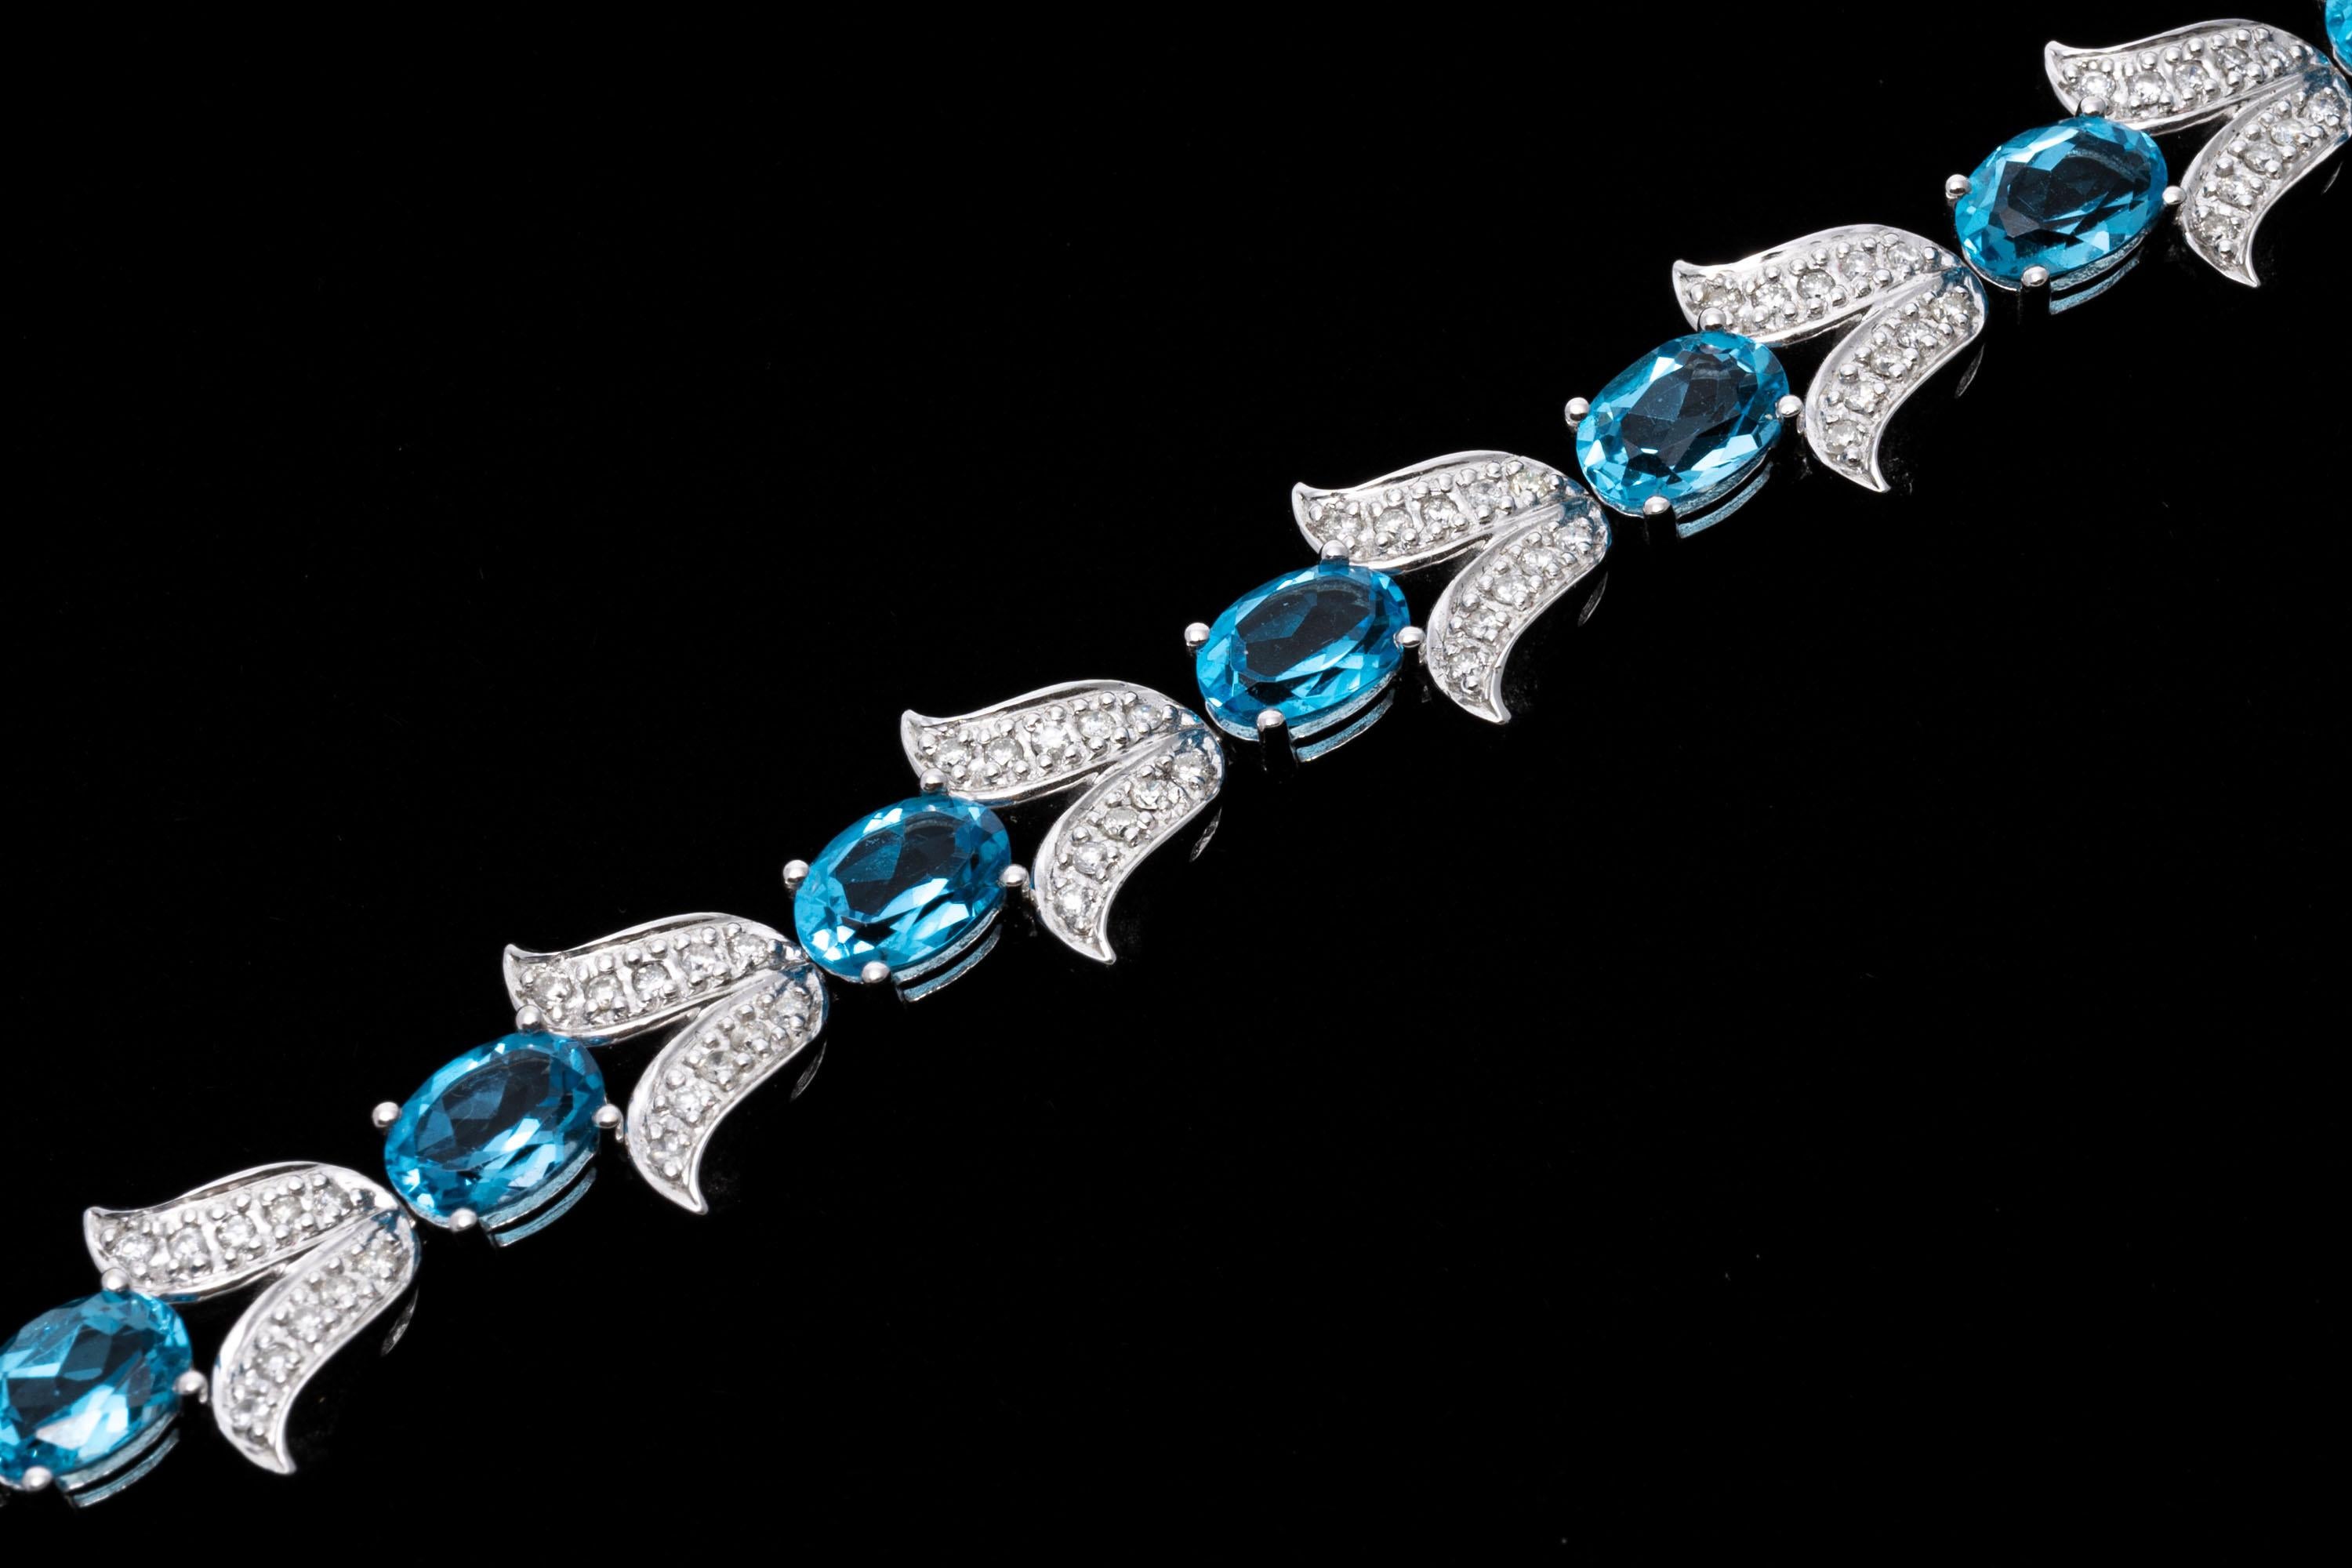 14k white gold bracelet. This beautiful bracelet features oval faceted, medium blue color blue topaz stones, approximately 10.45 TCW, prong set, alternating with tulip shaped links set with accent diamonds, 1.10 TCW. The bracelet has a hidden box